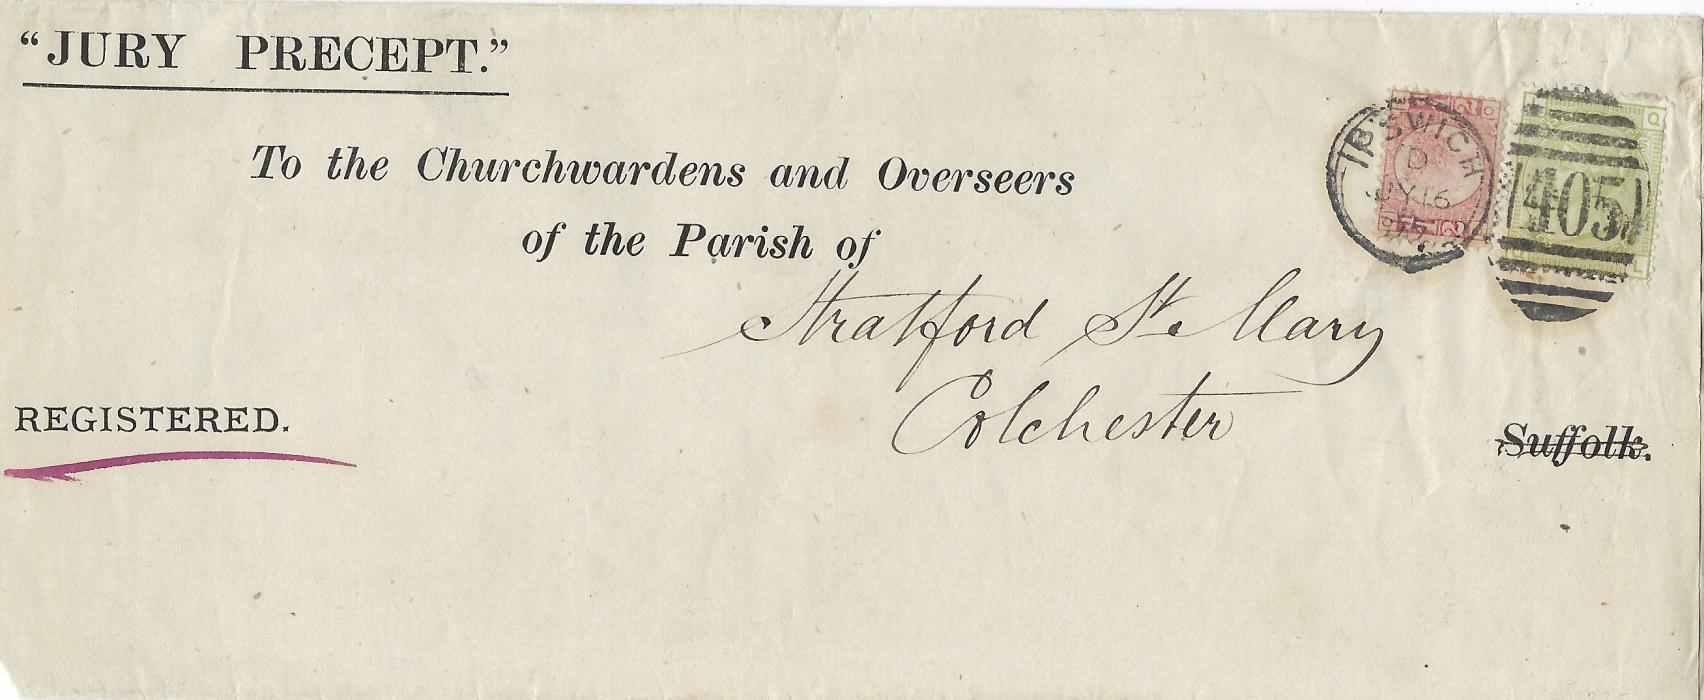 Great Britain 1877 (JY 16) printed JURY PRECEPT registered envelope to Parish of Stratfodr St Mary at Colchester franked 1870 ½d. , plate 10 and 1877 4d. sage-green, plate 15 tied ‘405’ Ipswich duplex, reverse with IPSWICH SORTING TENDER cds and Colchester cds all of same date; small corner fault not detracting.